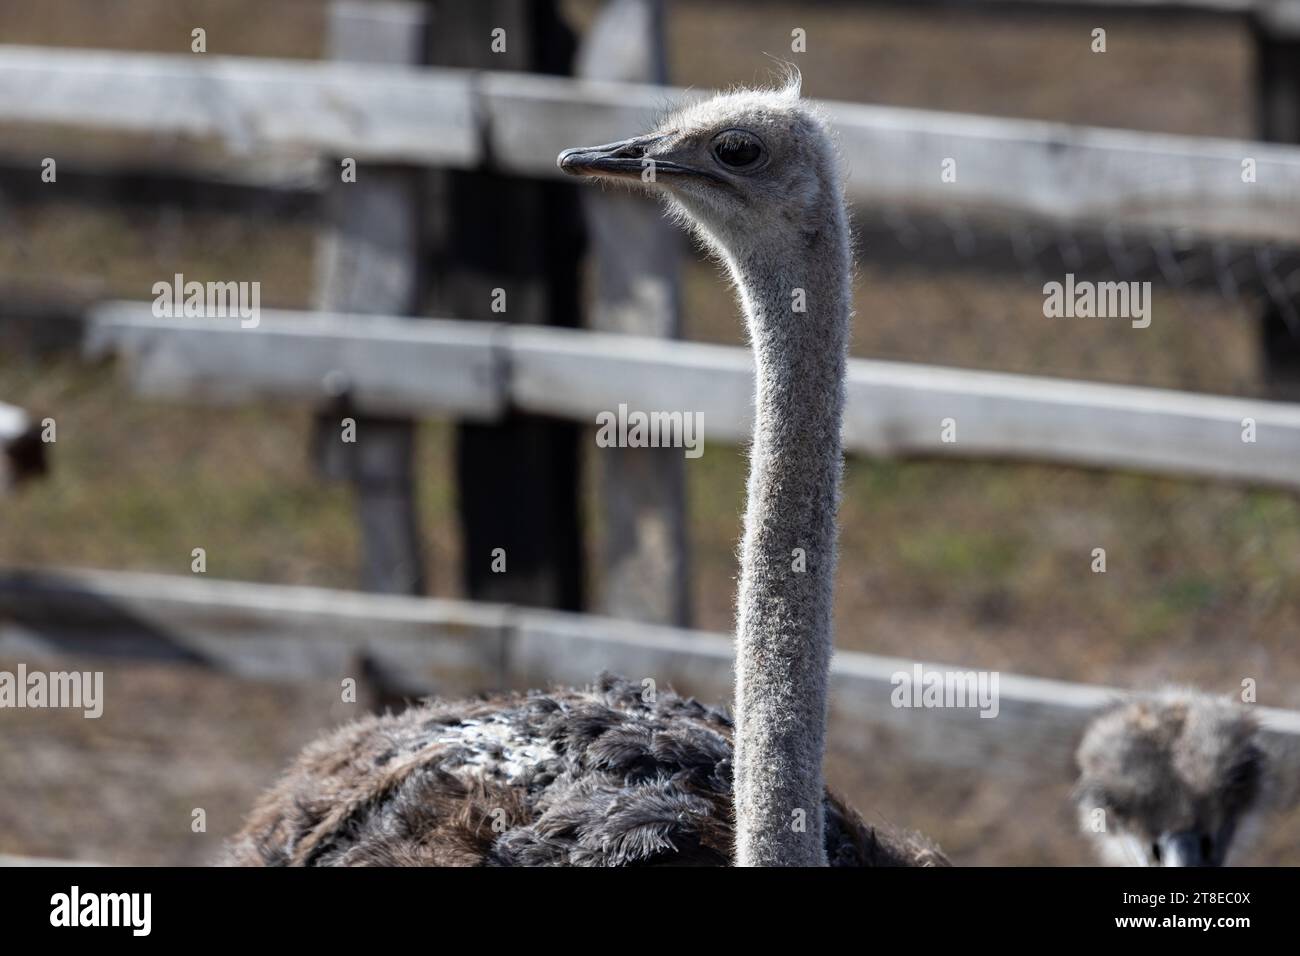 Each ostrich's visage is a study in unique character, with large, soulful eyes that seem to reflect the world around them. Their long, graceful necks Stock Photo